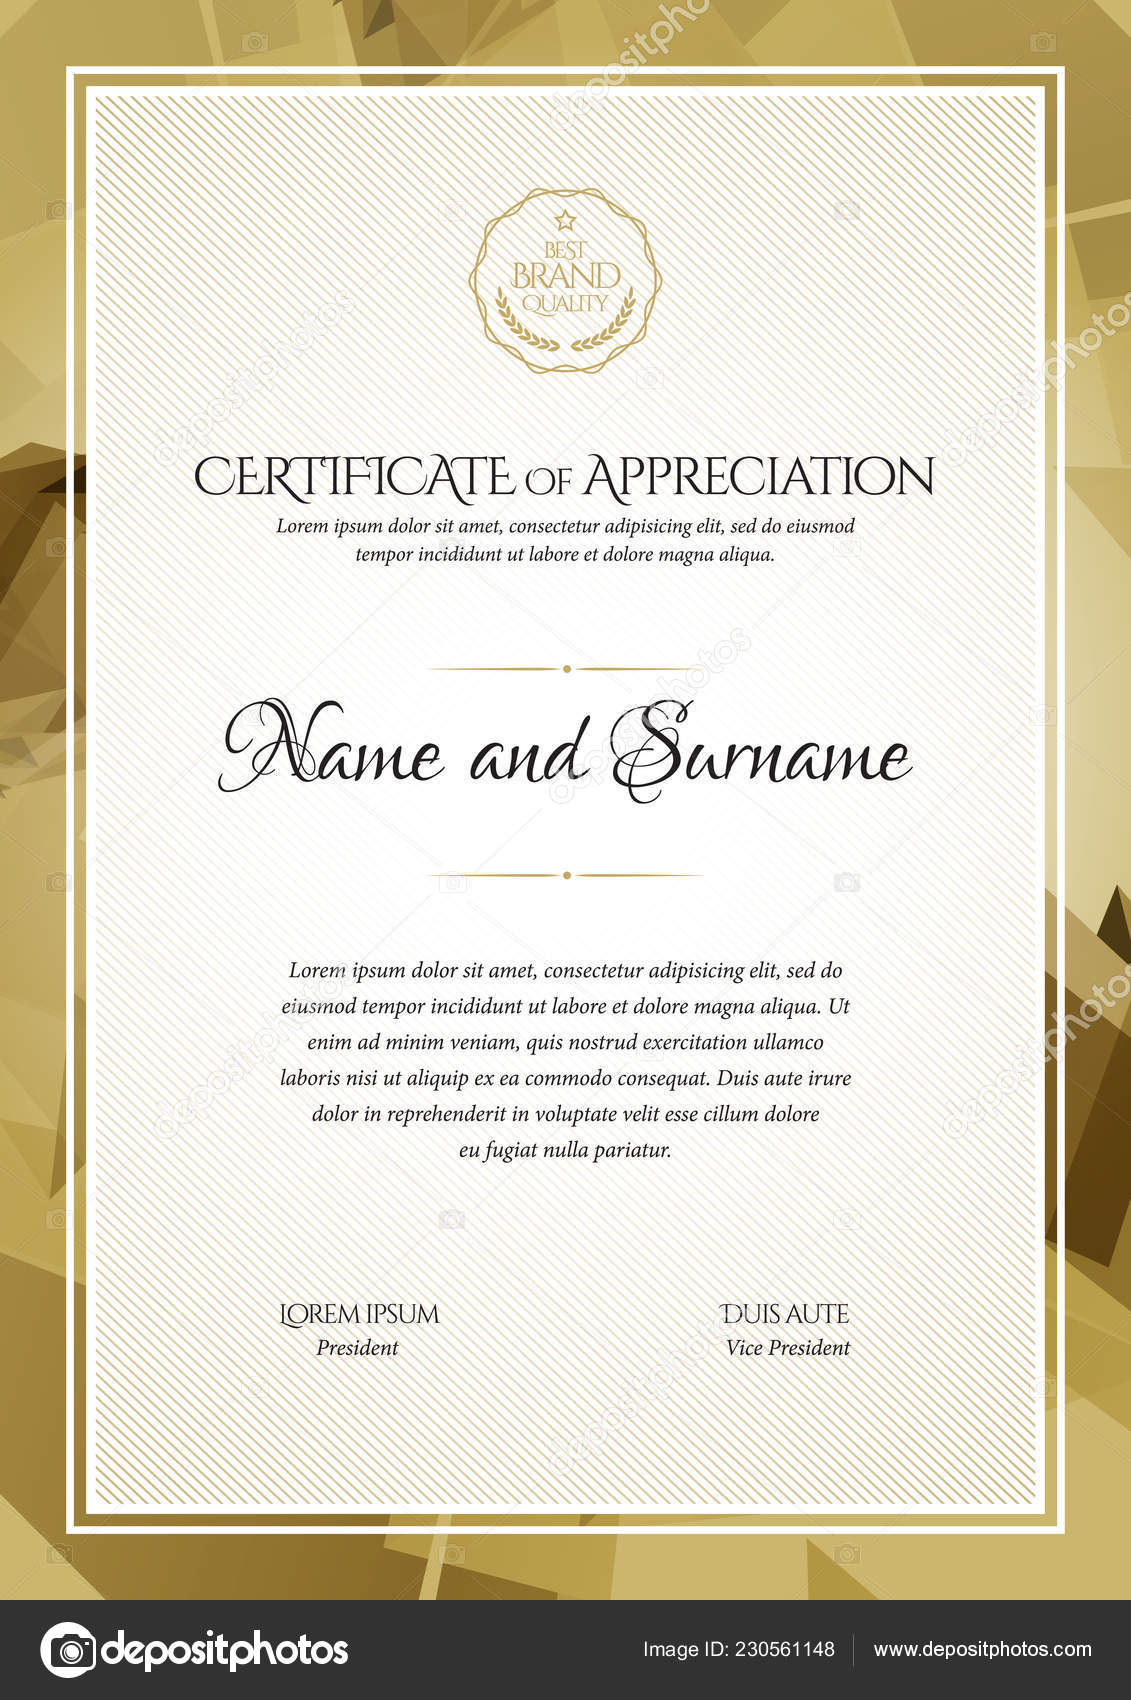 Certificate Template Diploma Modern Design Gift Certificate Vector Pertaining To Graduation Gift Certificate Template Free